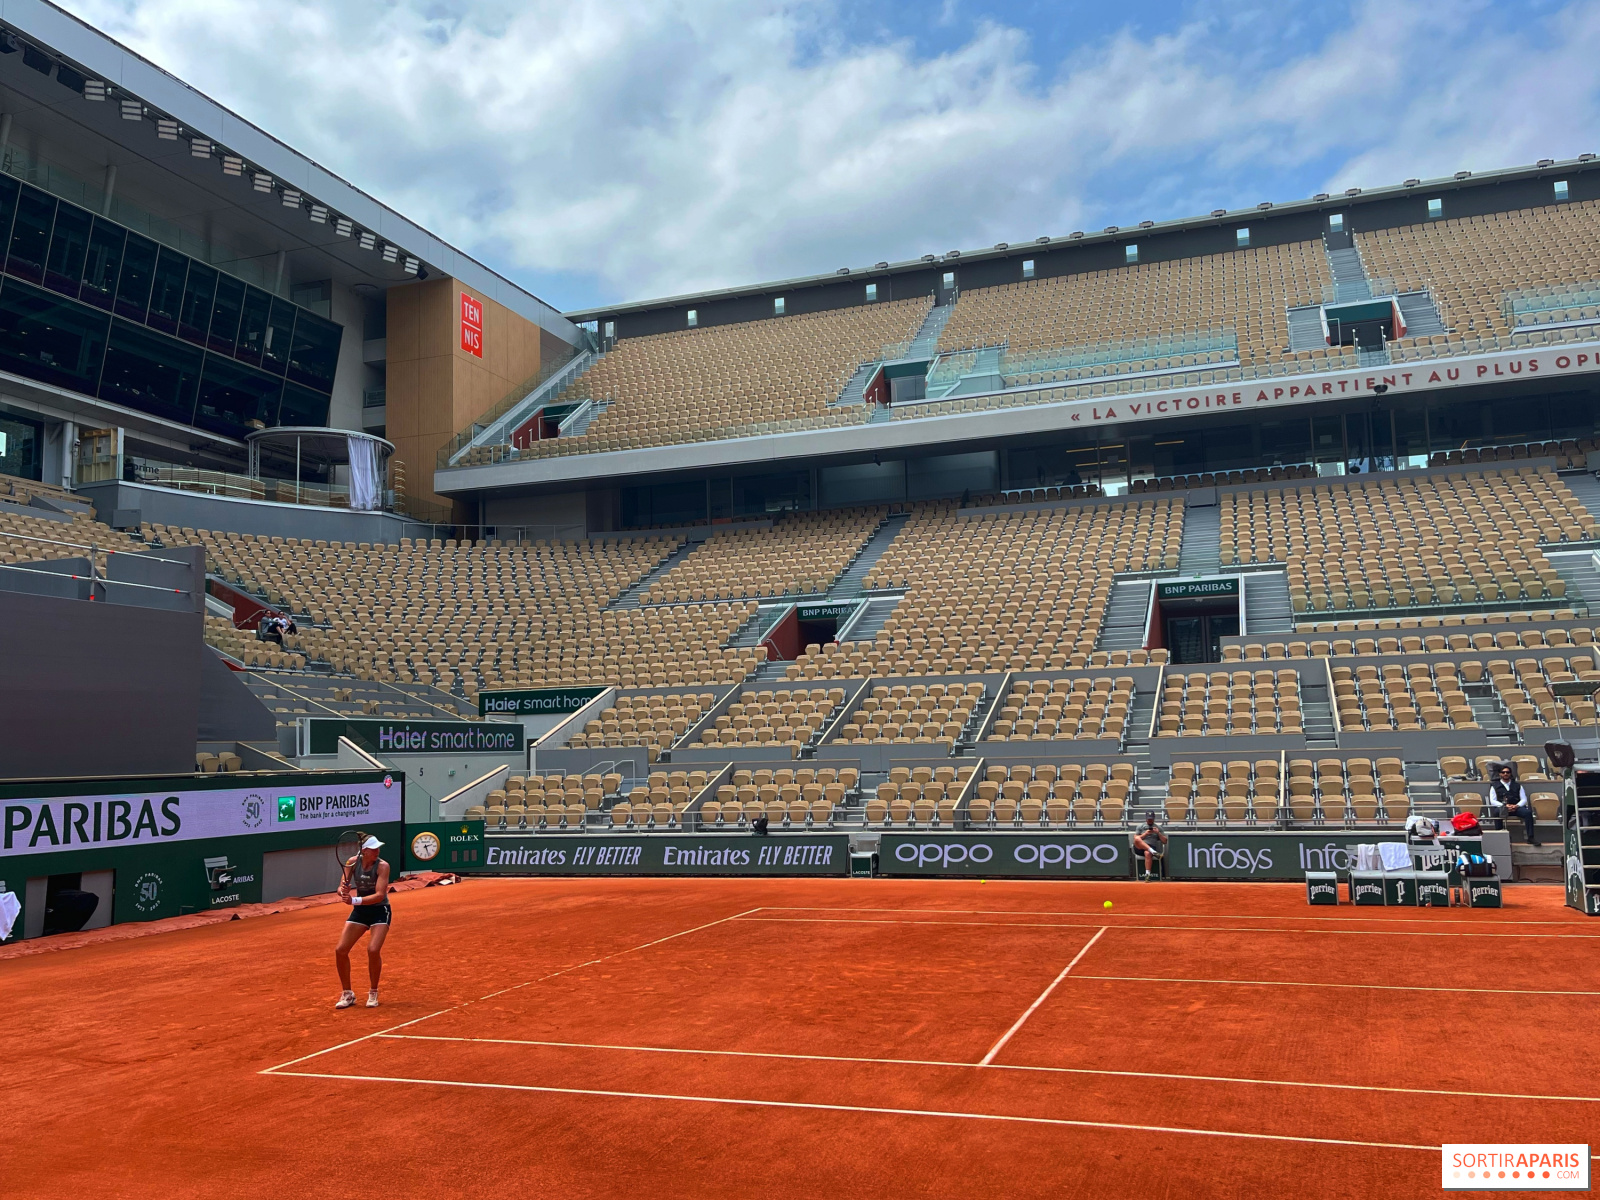 Roland Garros 2023 night sessions advanced by 30 minutes this year